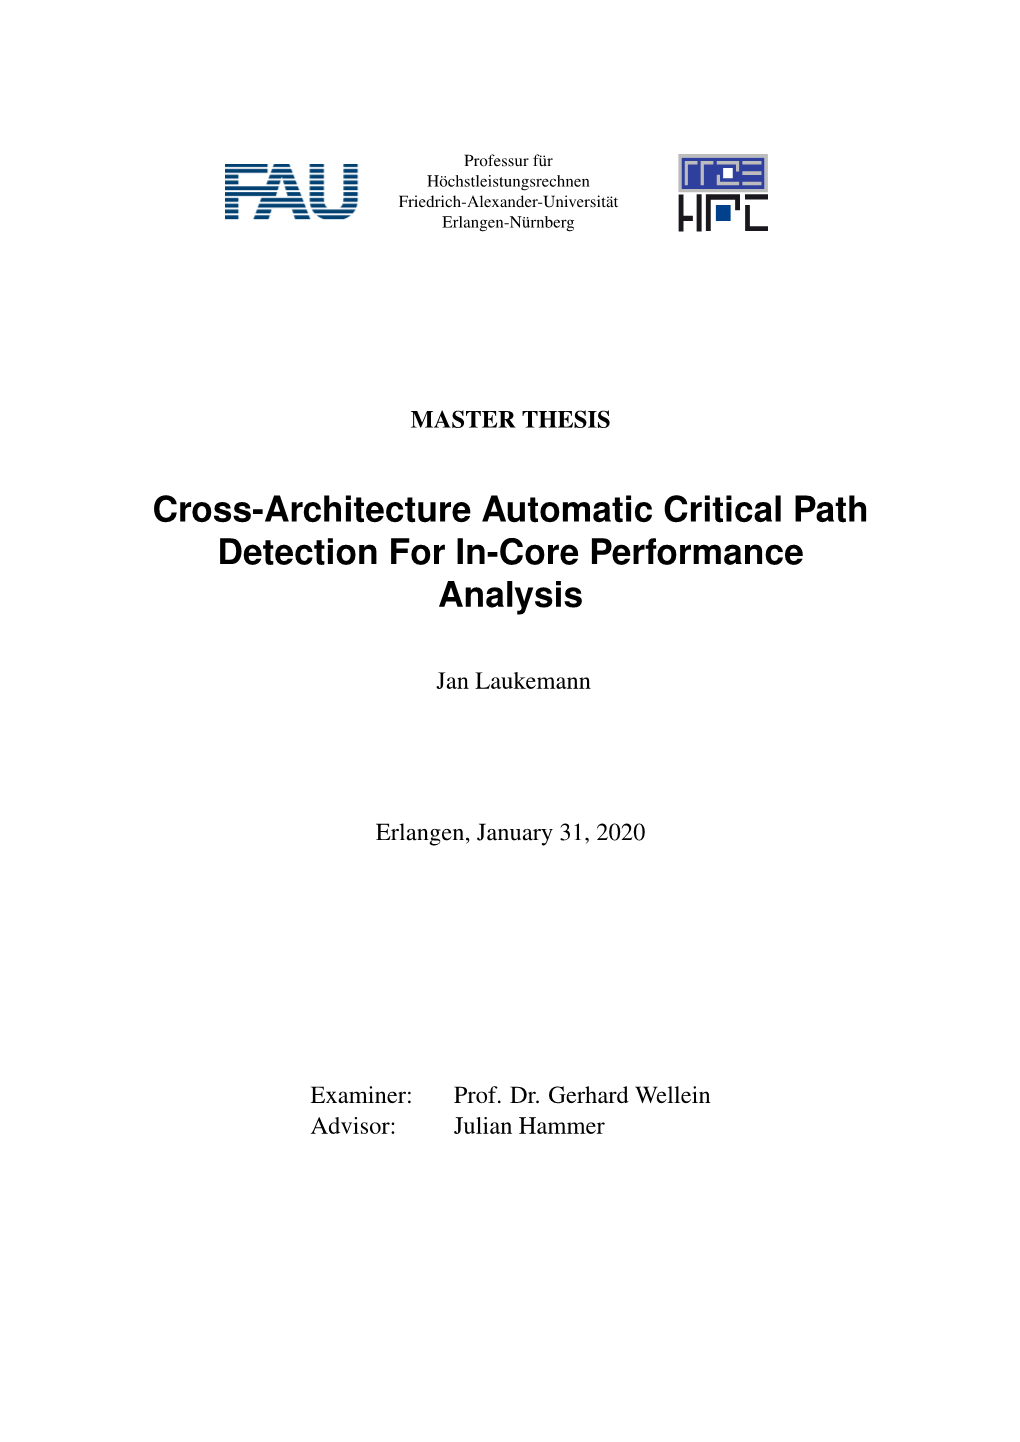 Cross-Architecture Automatic Critical Path Detection for In-Core Performance Analysis